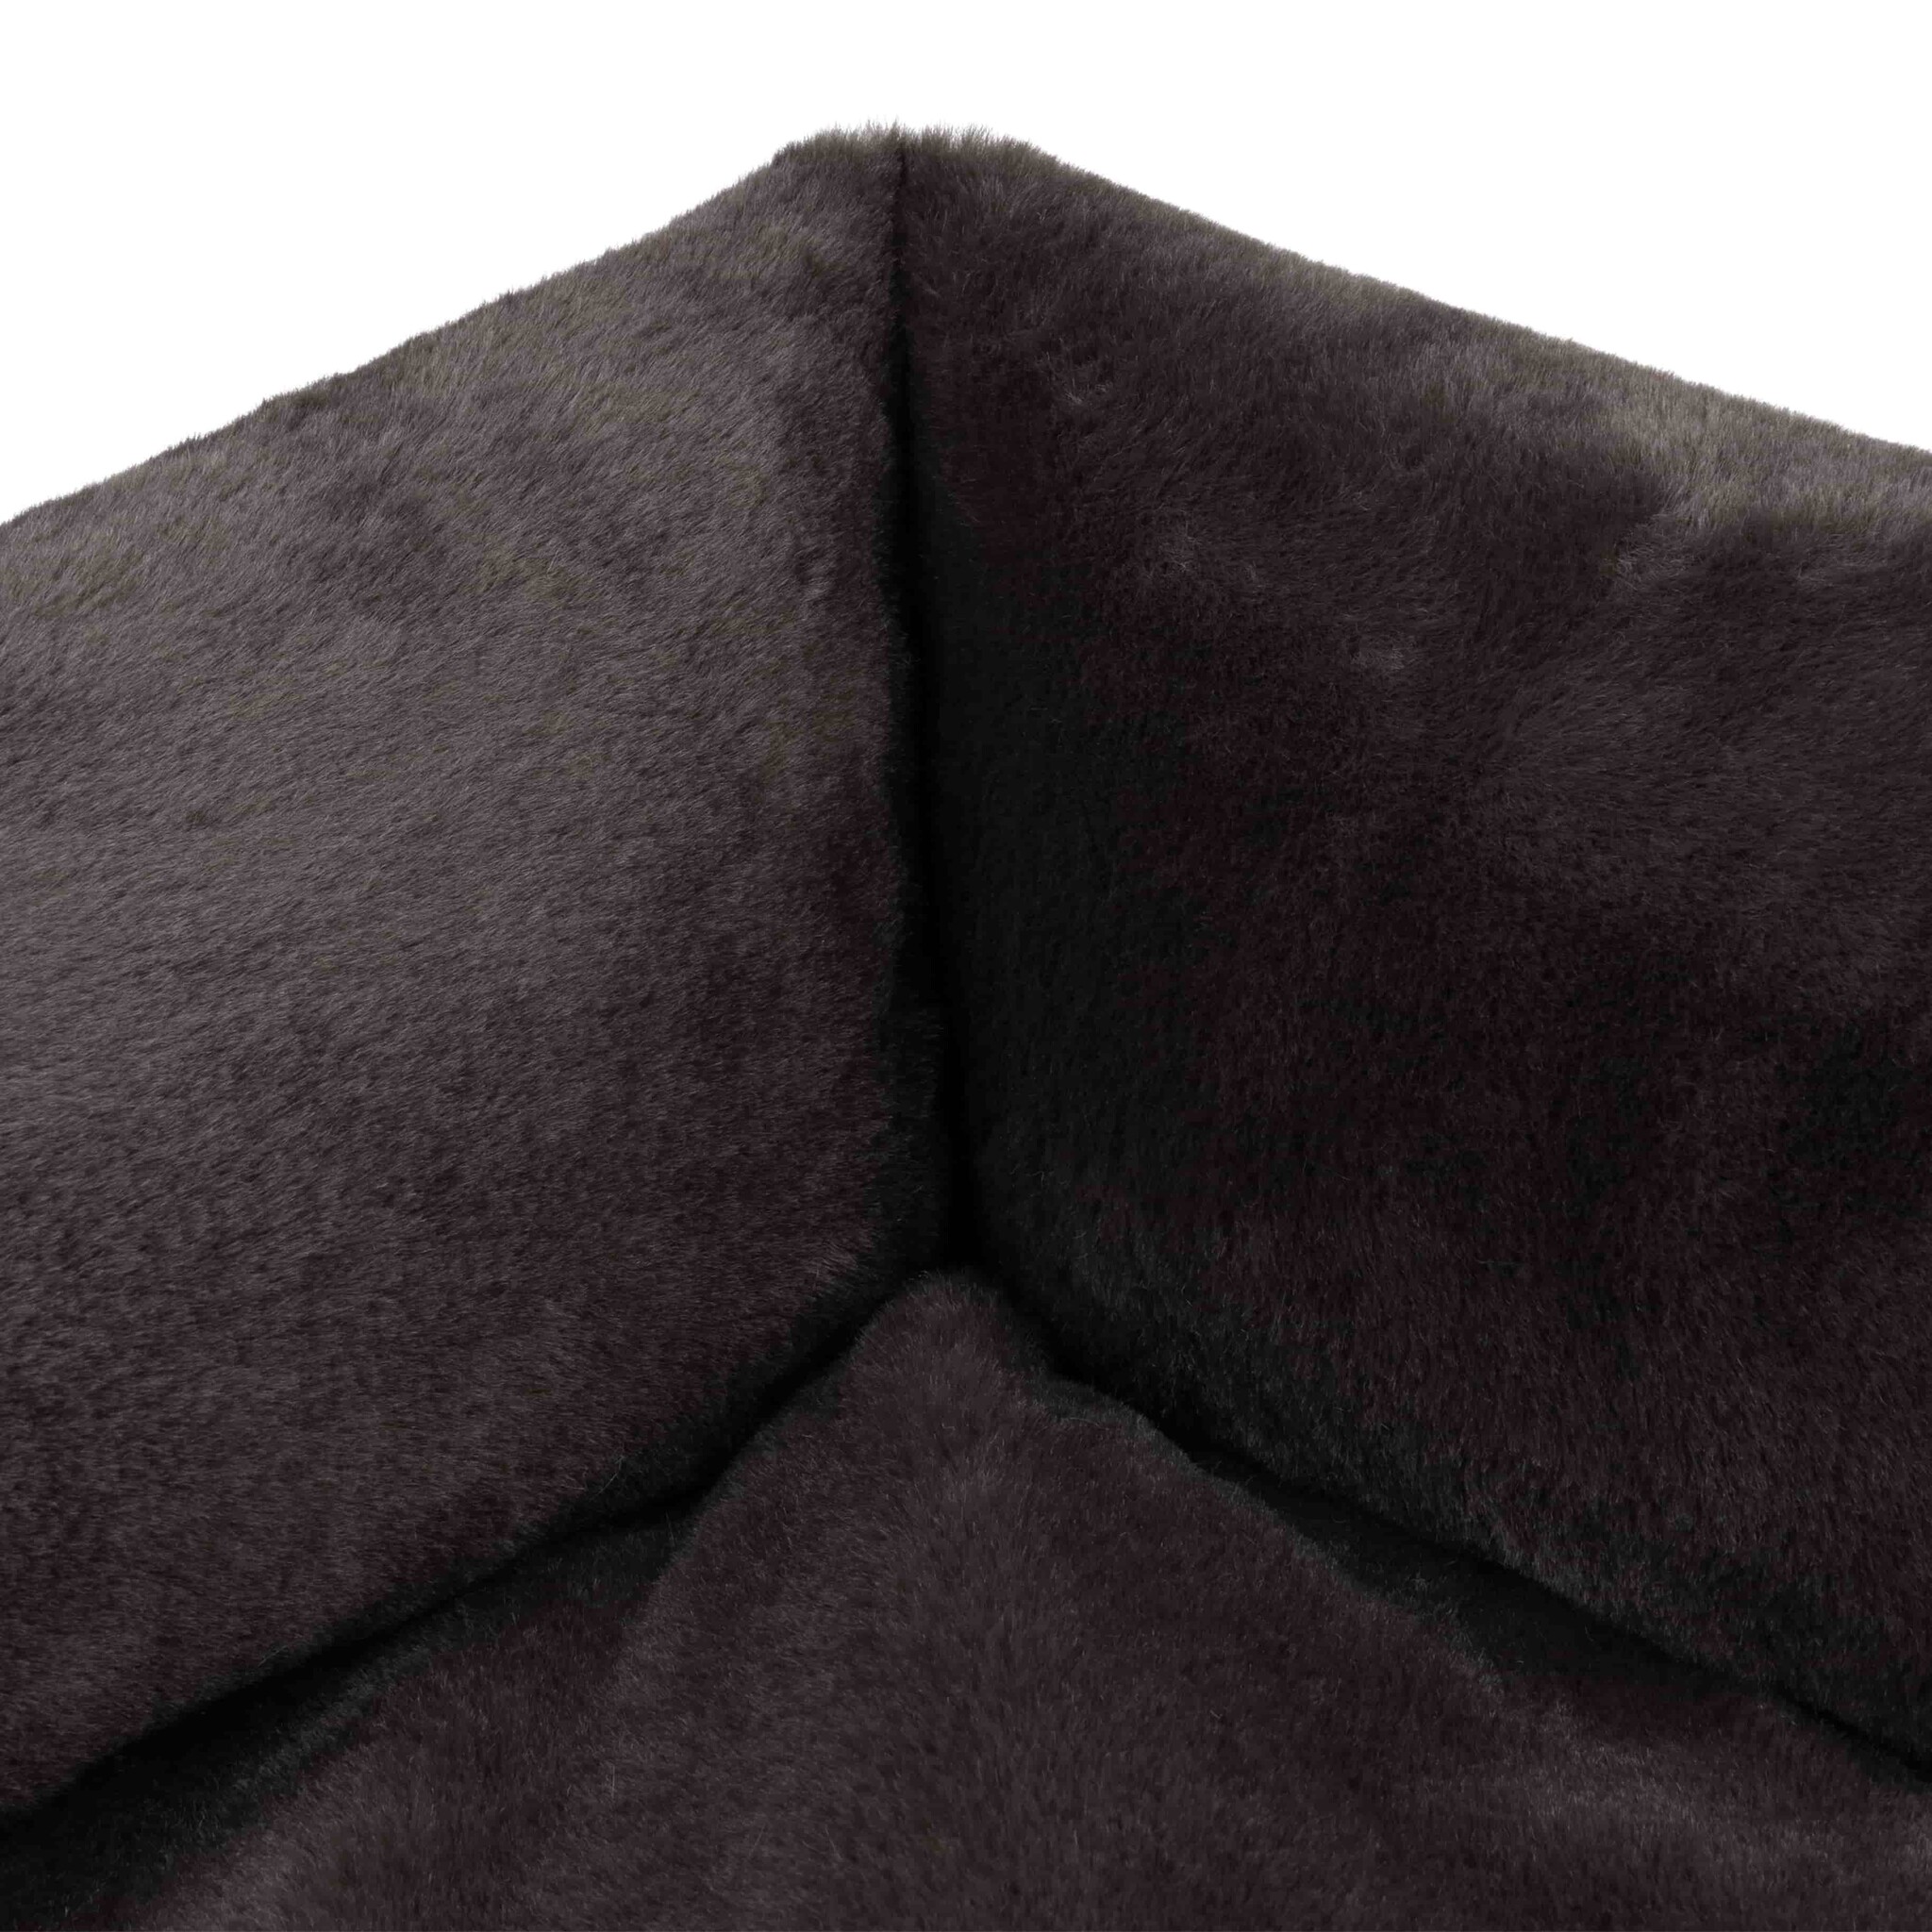 NUZZLE - Soft Sofa Dog Bed - Available in 3 sizes - Dark Grey, Taupe and Merengue-10